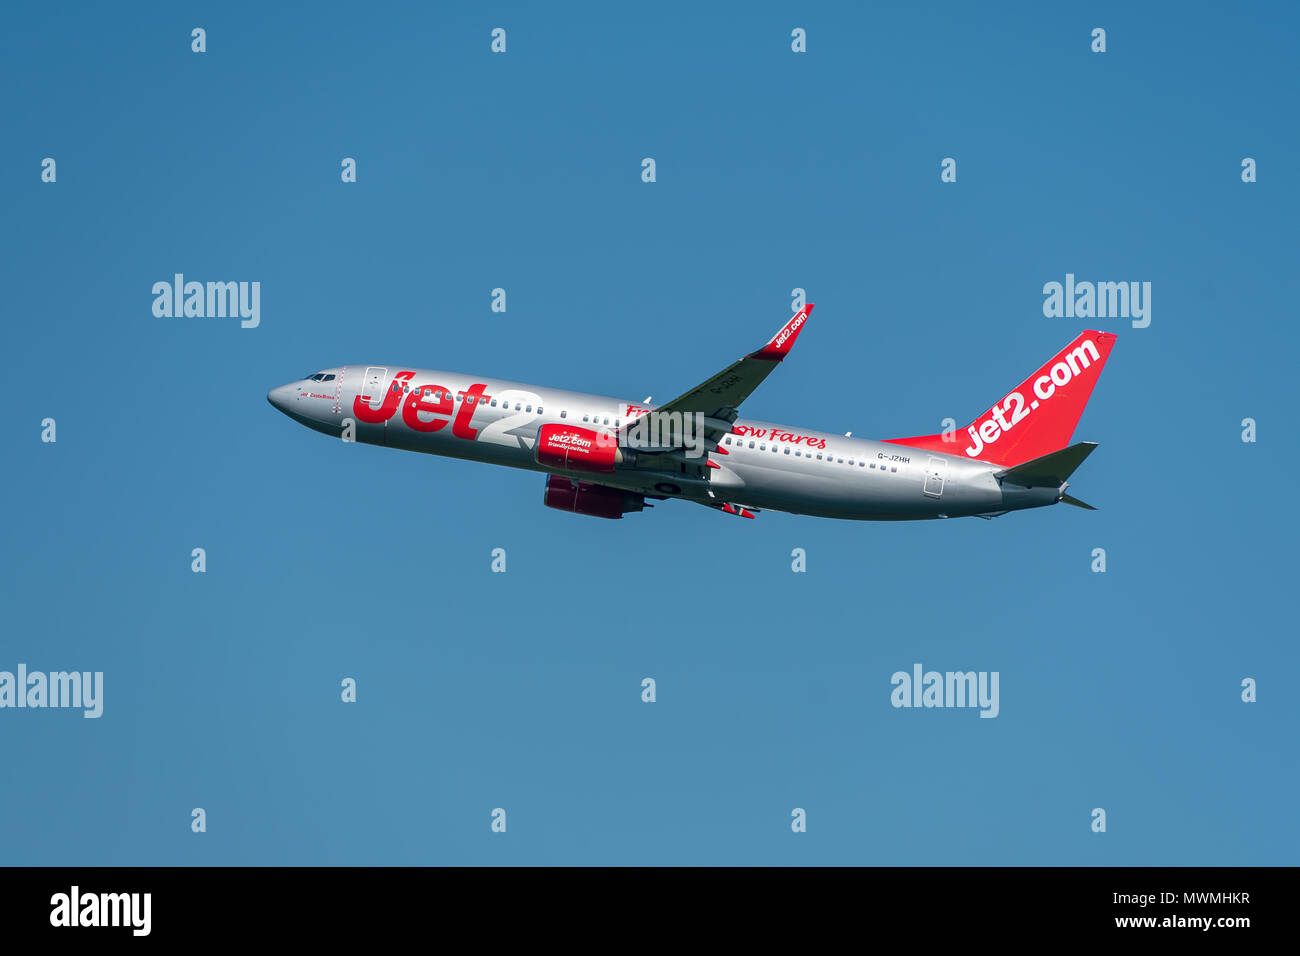 MANCHESTER, UNITED KINGDOM - MAY 07, 2018: Jet2 airlines Boeing 737 departing Manchester airport Stock Photo